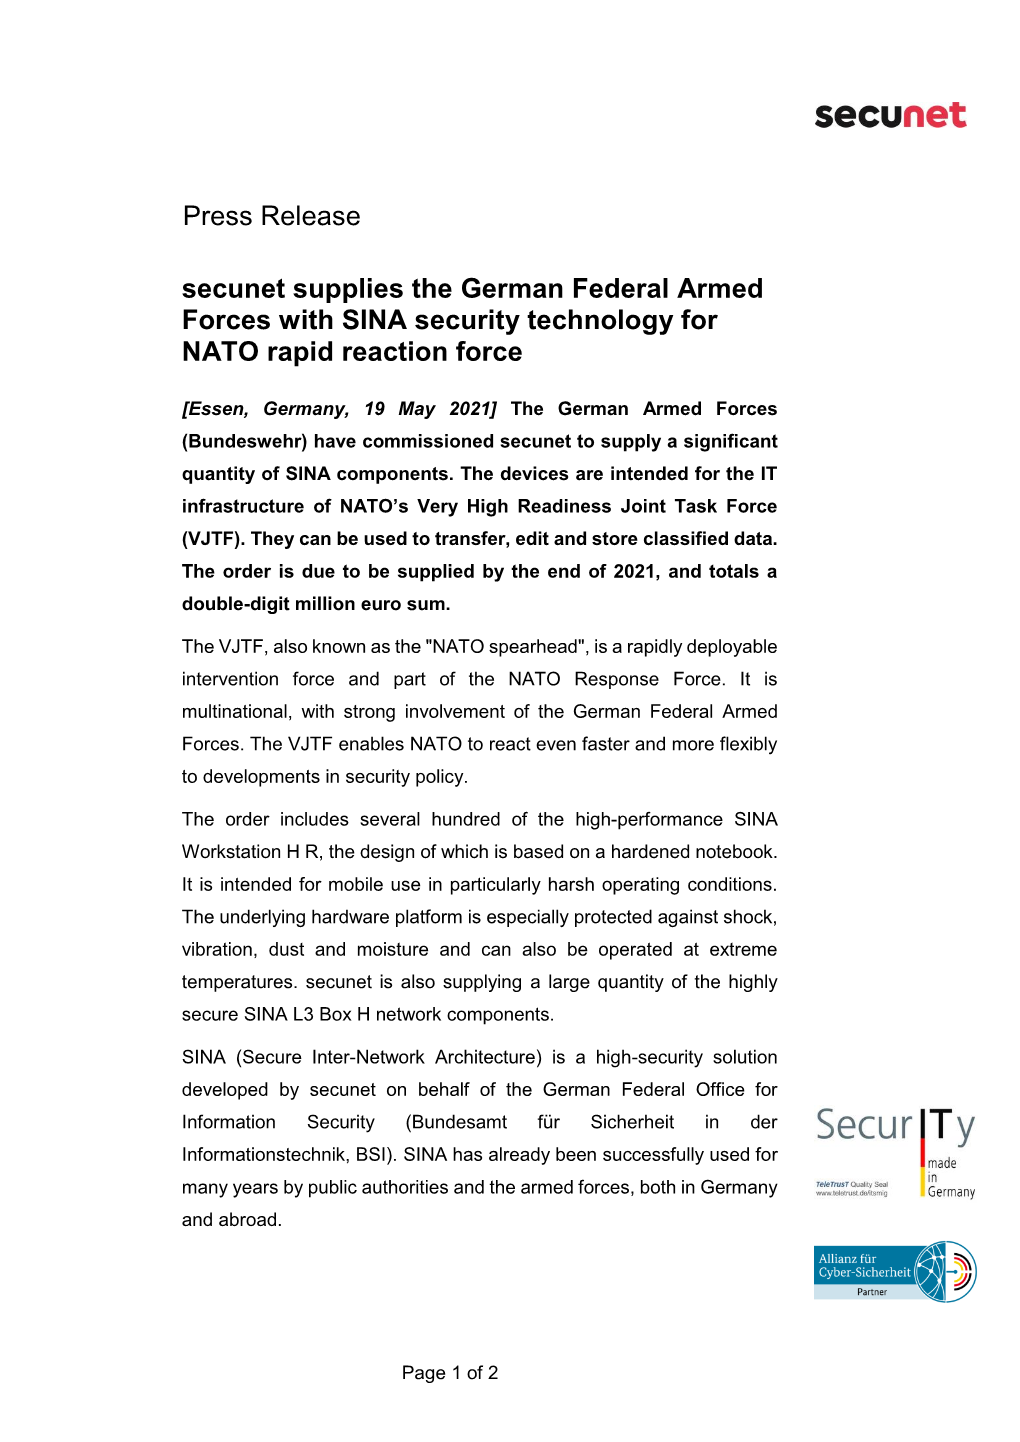 Press Release Secunet Supplies the German Federal Armed Forces with SINA Security Technology for NATO Rapid Reaction Force